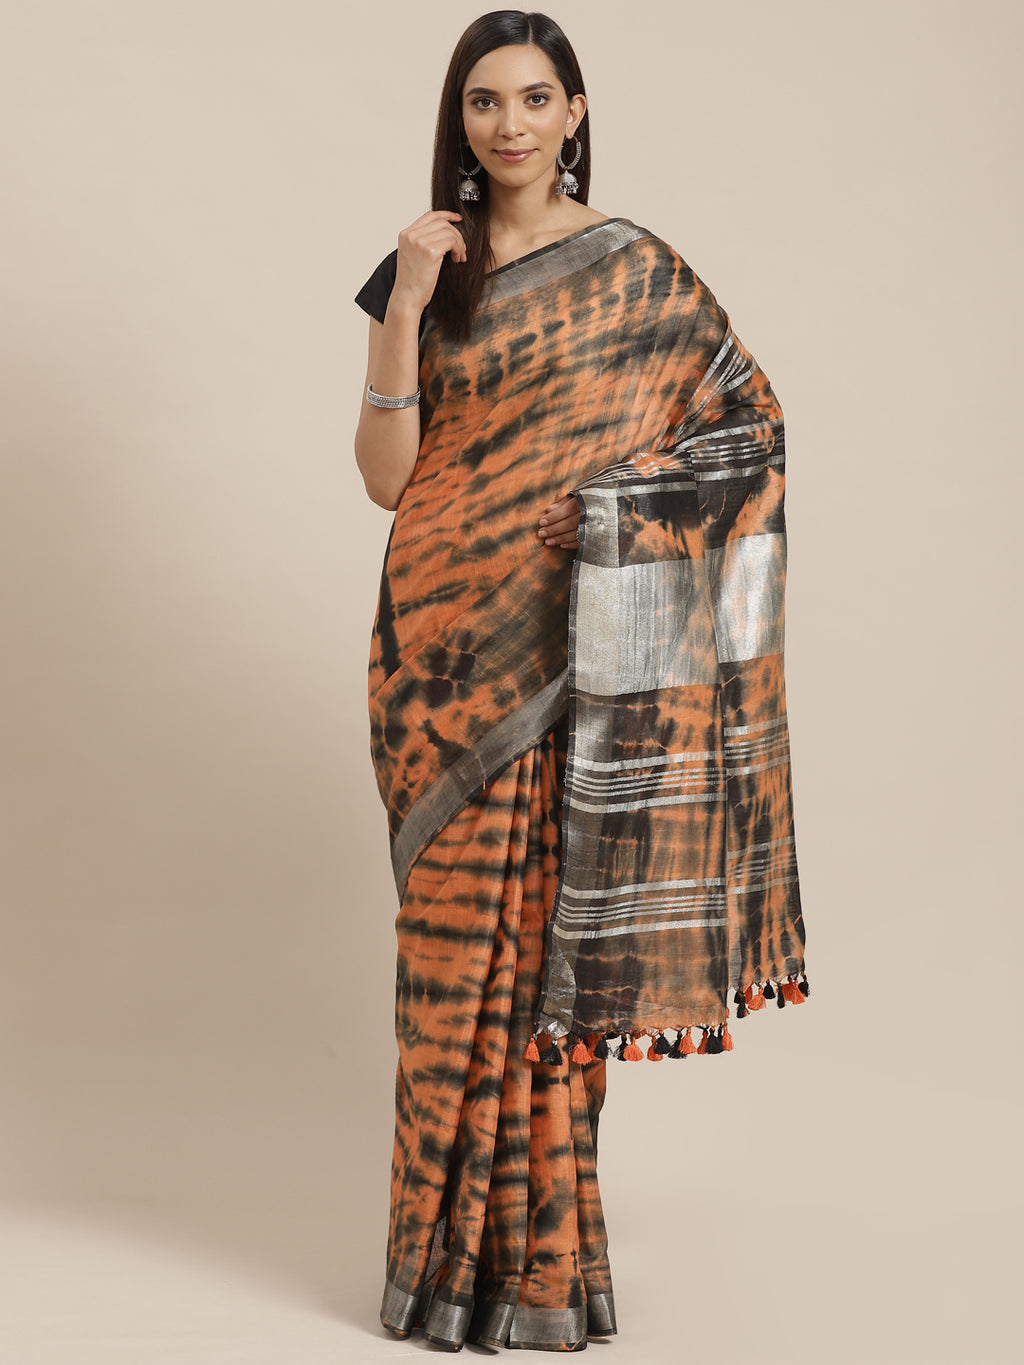 Orange and White, Kalakari India Linen Shibori Woven Saree and Blouse ALBGSA0058-Saree-Kalakari India-ALBGSA0058-Cotton, Geographical Indication, Hand Crafted, Heritage Prints, Linen, Natural Dyes, Red, Sarees, Shibori, Sustainable Fabrics, Woven, Yellow-[Linen,Ethnic,wear,Fashionista,Handloom,Handicraft,Indigo,blockprint,block,print,Cotton,Chanderi,Blue, latest,classy,party,bollywood,trendy,summer,style,traditional,formal,elegant,unique,style,hand,block,print, dabu,booti,gift,present,glamorous,